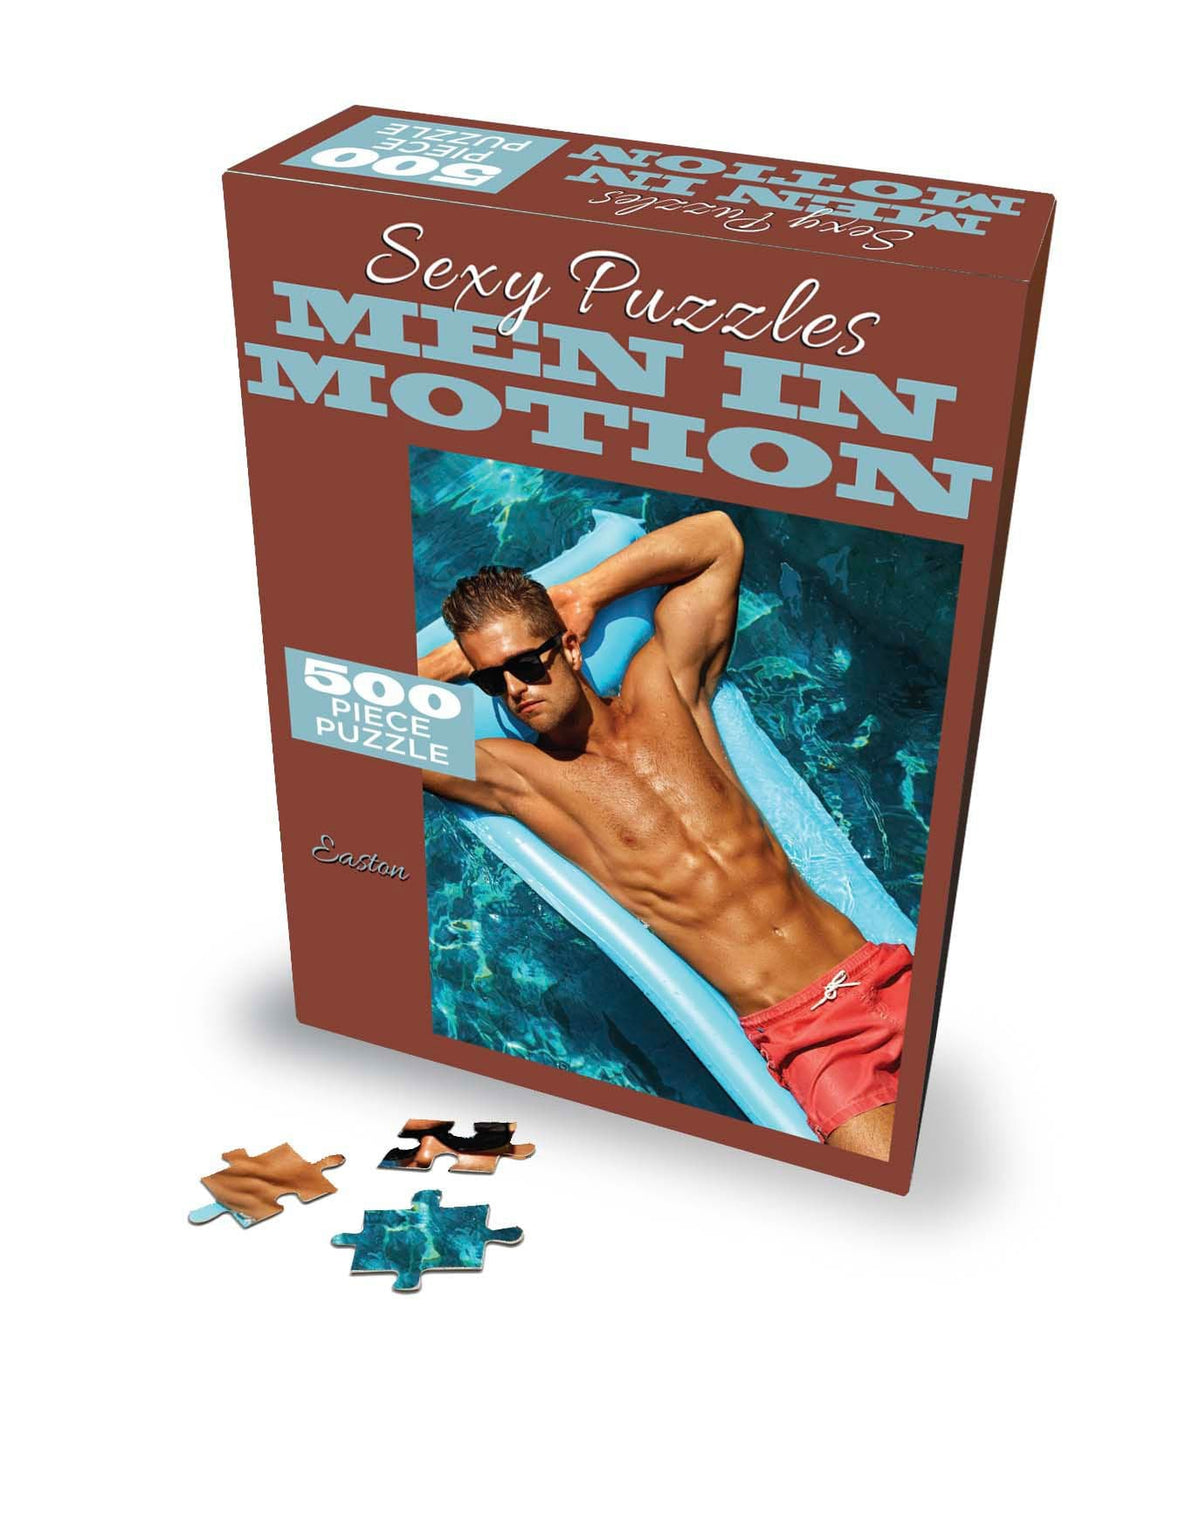 sexy puzzles men in bed easton